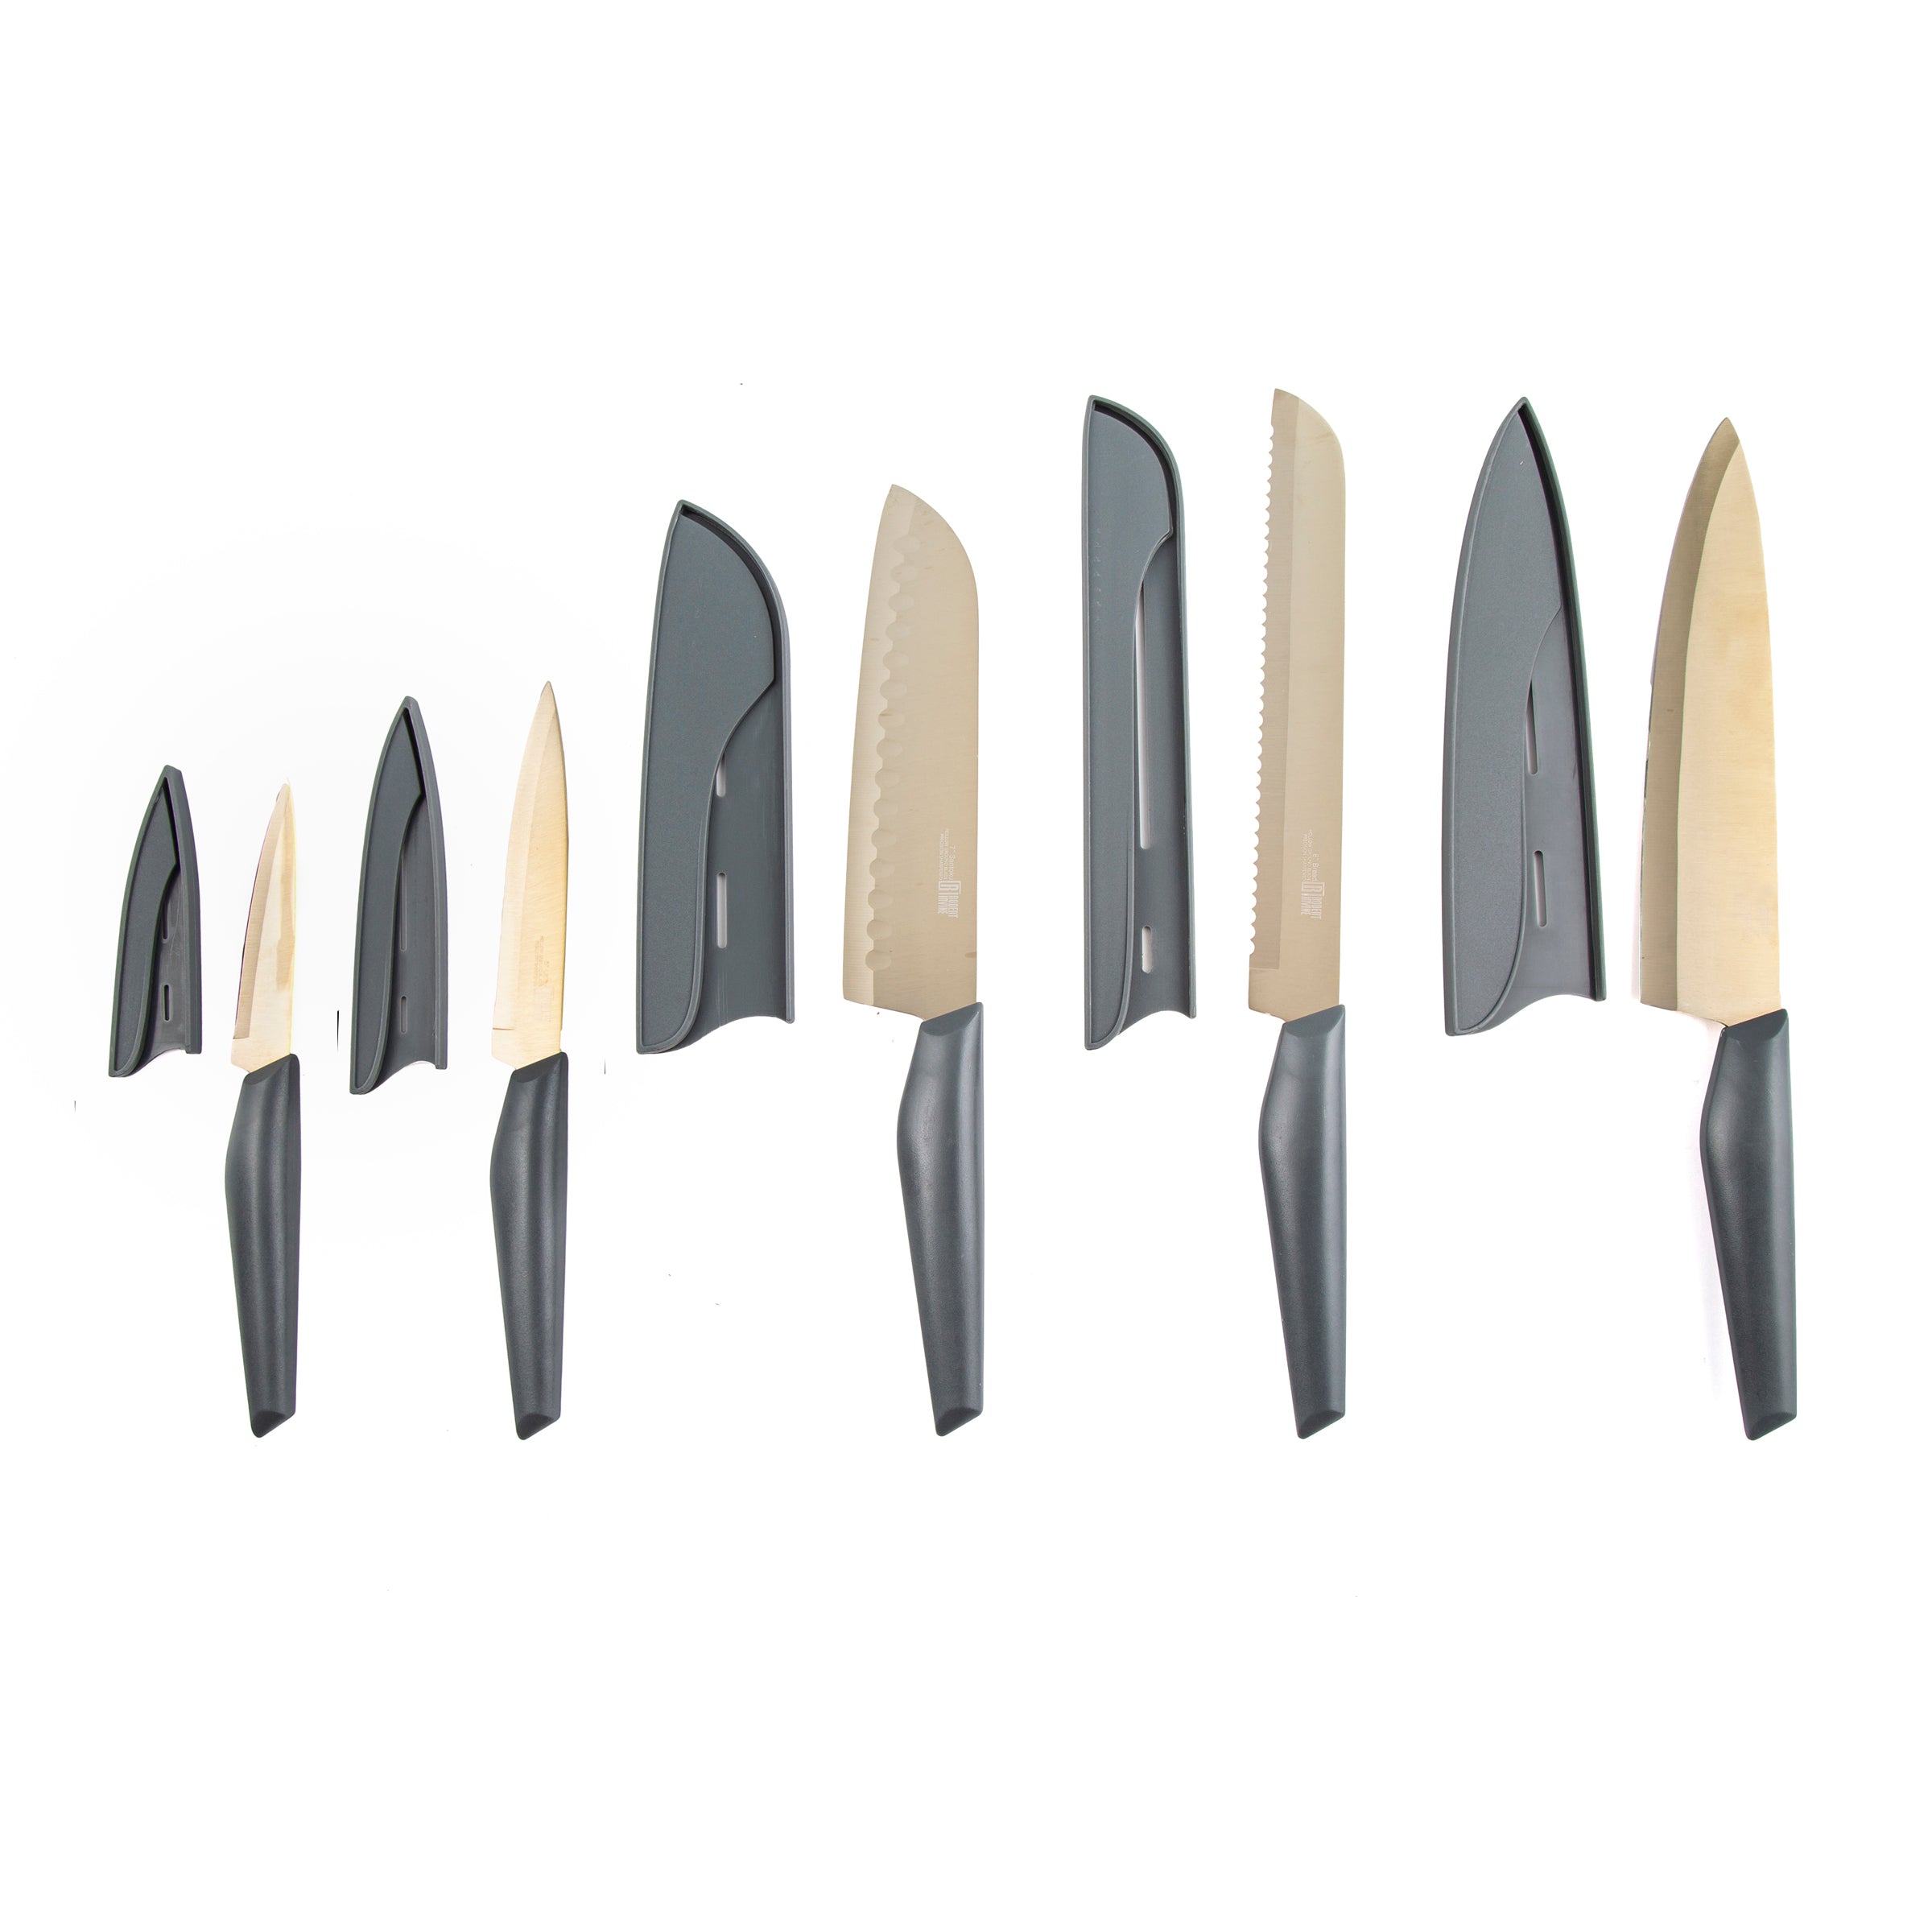 Chicago Cutlery Belden 15 pc Block Set - Stainless Steel Knives with  Comfort Grip Handles - Includes Chef, Bread, Slicer, Utility, Paring Knives  in the Cutlery department at